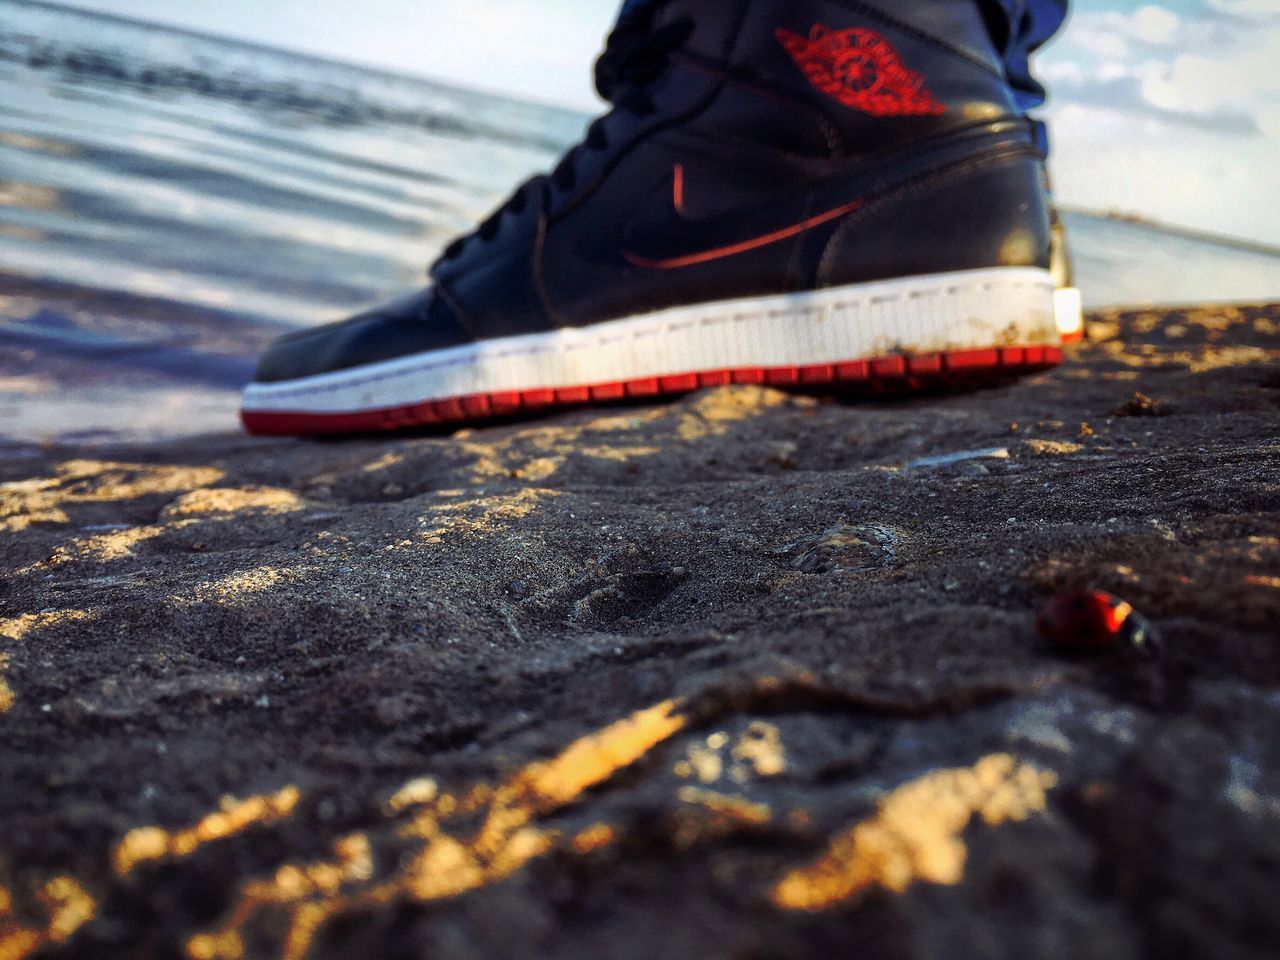 selective focus, street, surface level, close-up, transportation, focus on foreground, shoe, road, asphalt, outdoors, low section, beach, day, mode of transport, car, sand, sunlight, person